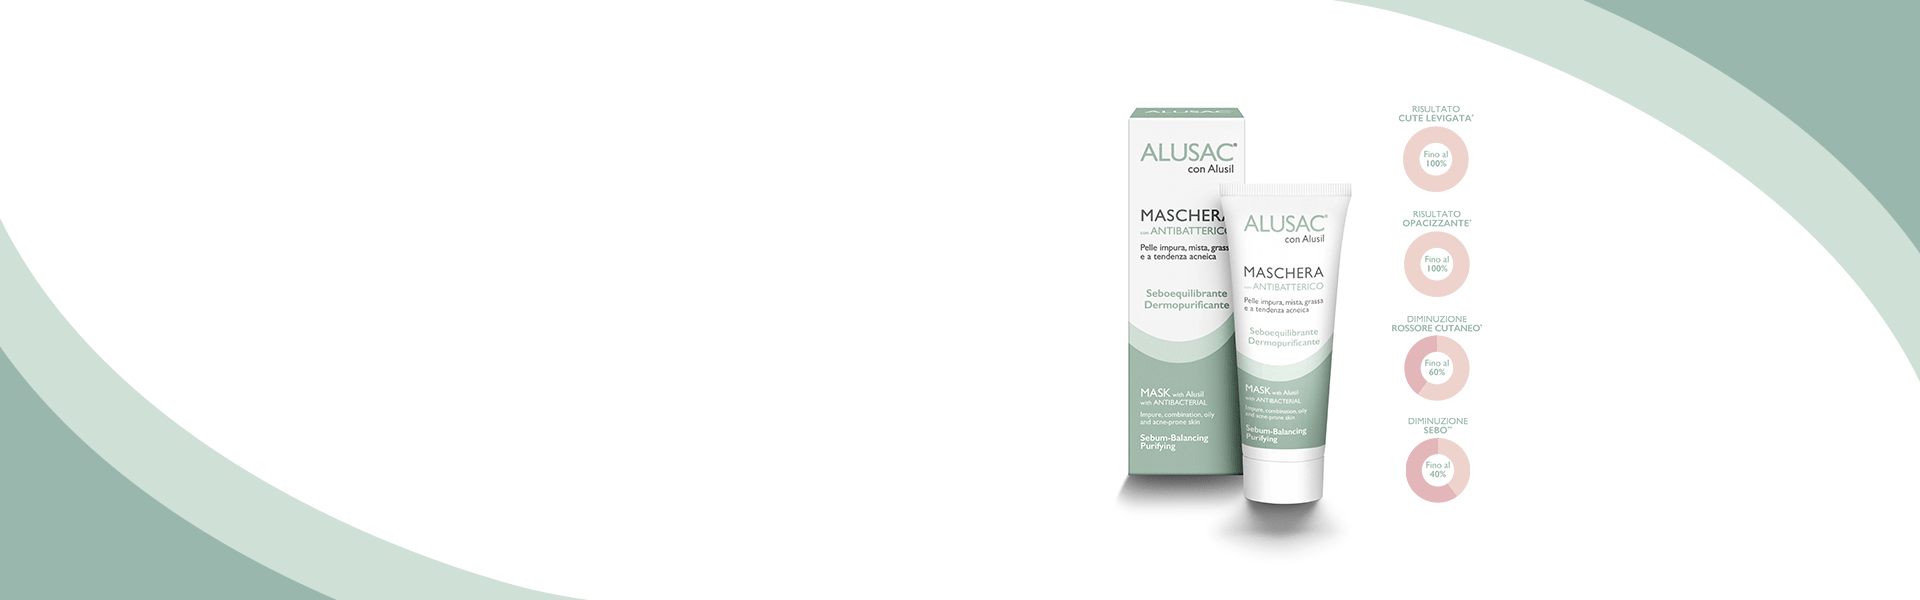 Alusac face mask is a blessing! Dalila